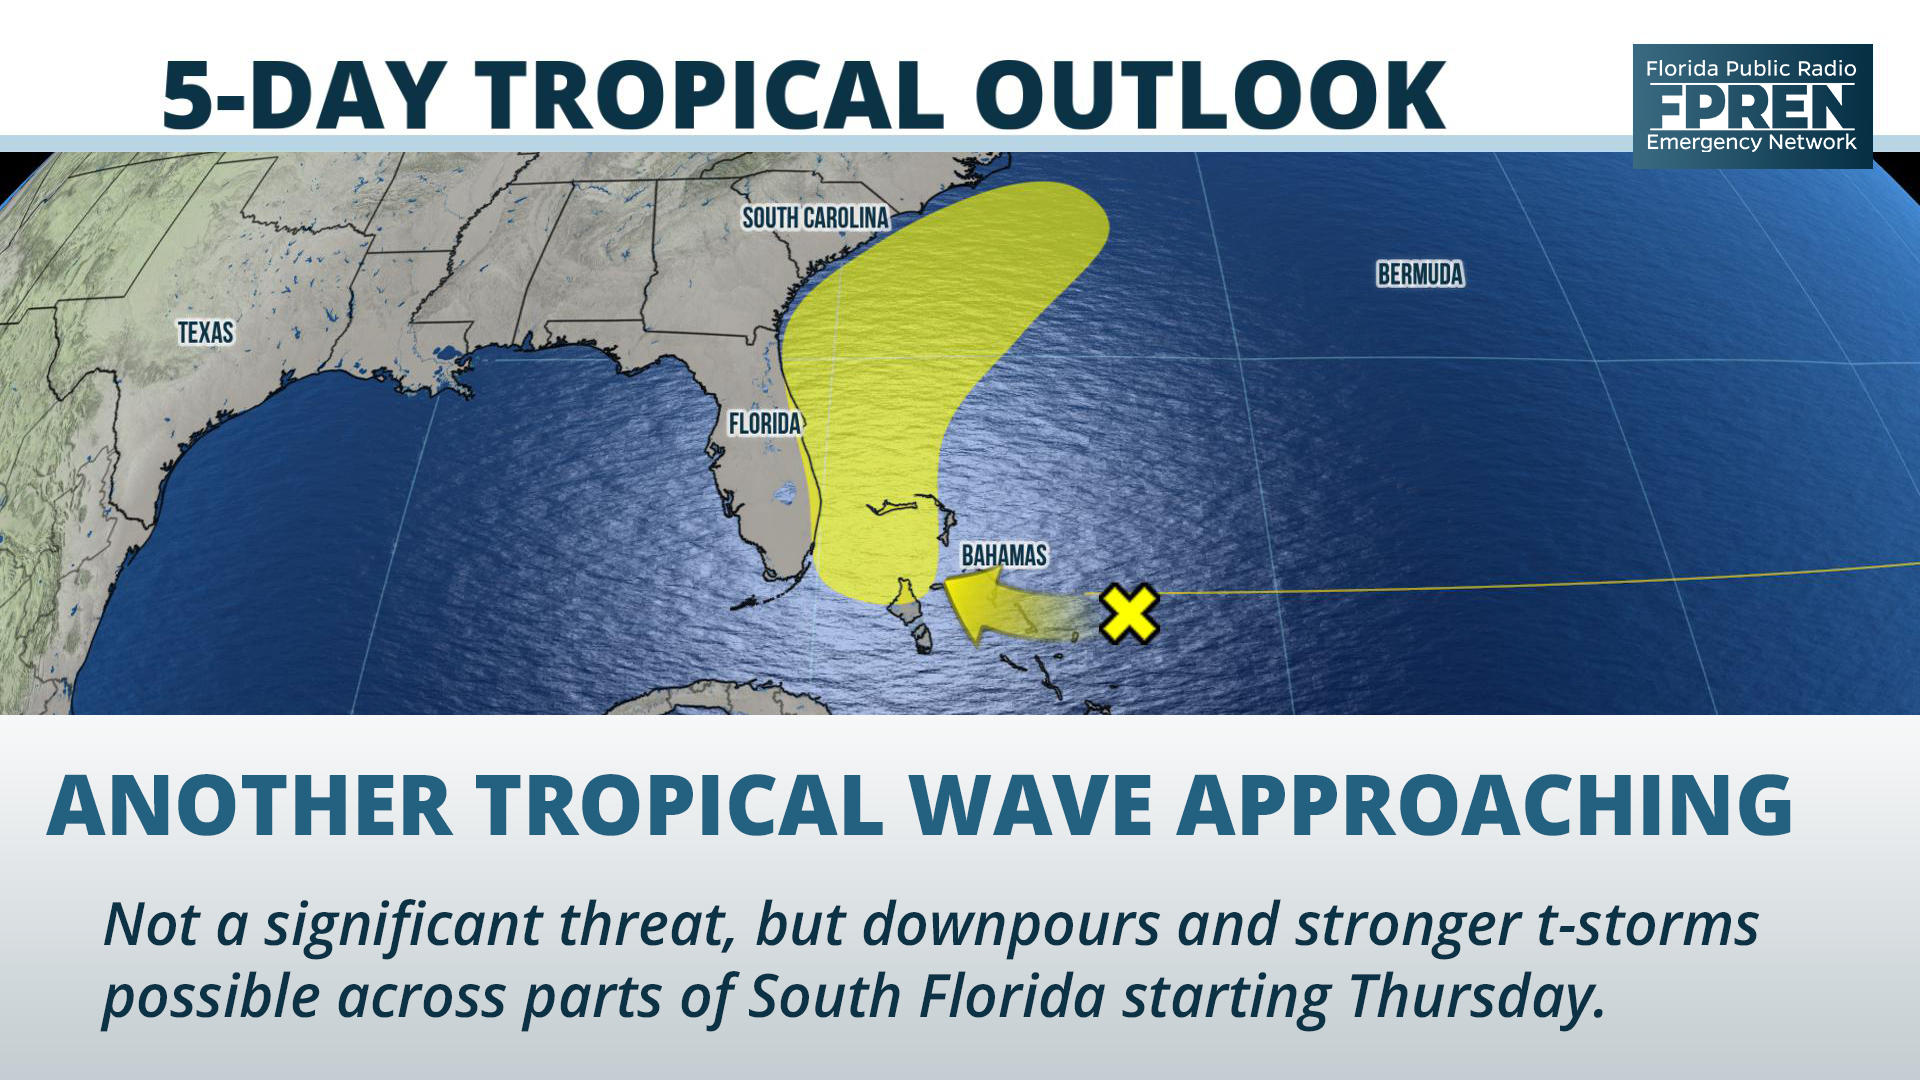 Another Tropical Wave is Likely to Skirt by South Florida WKGC Public